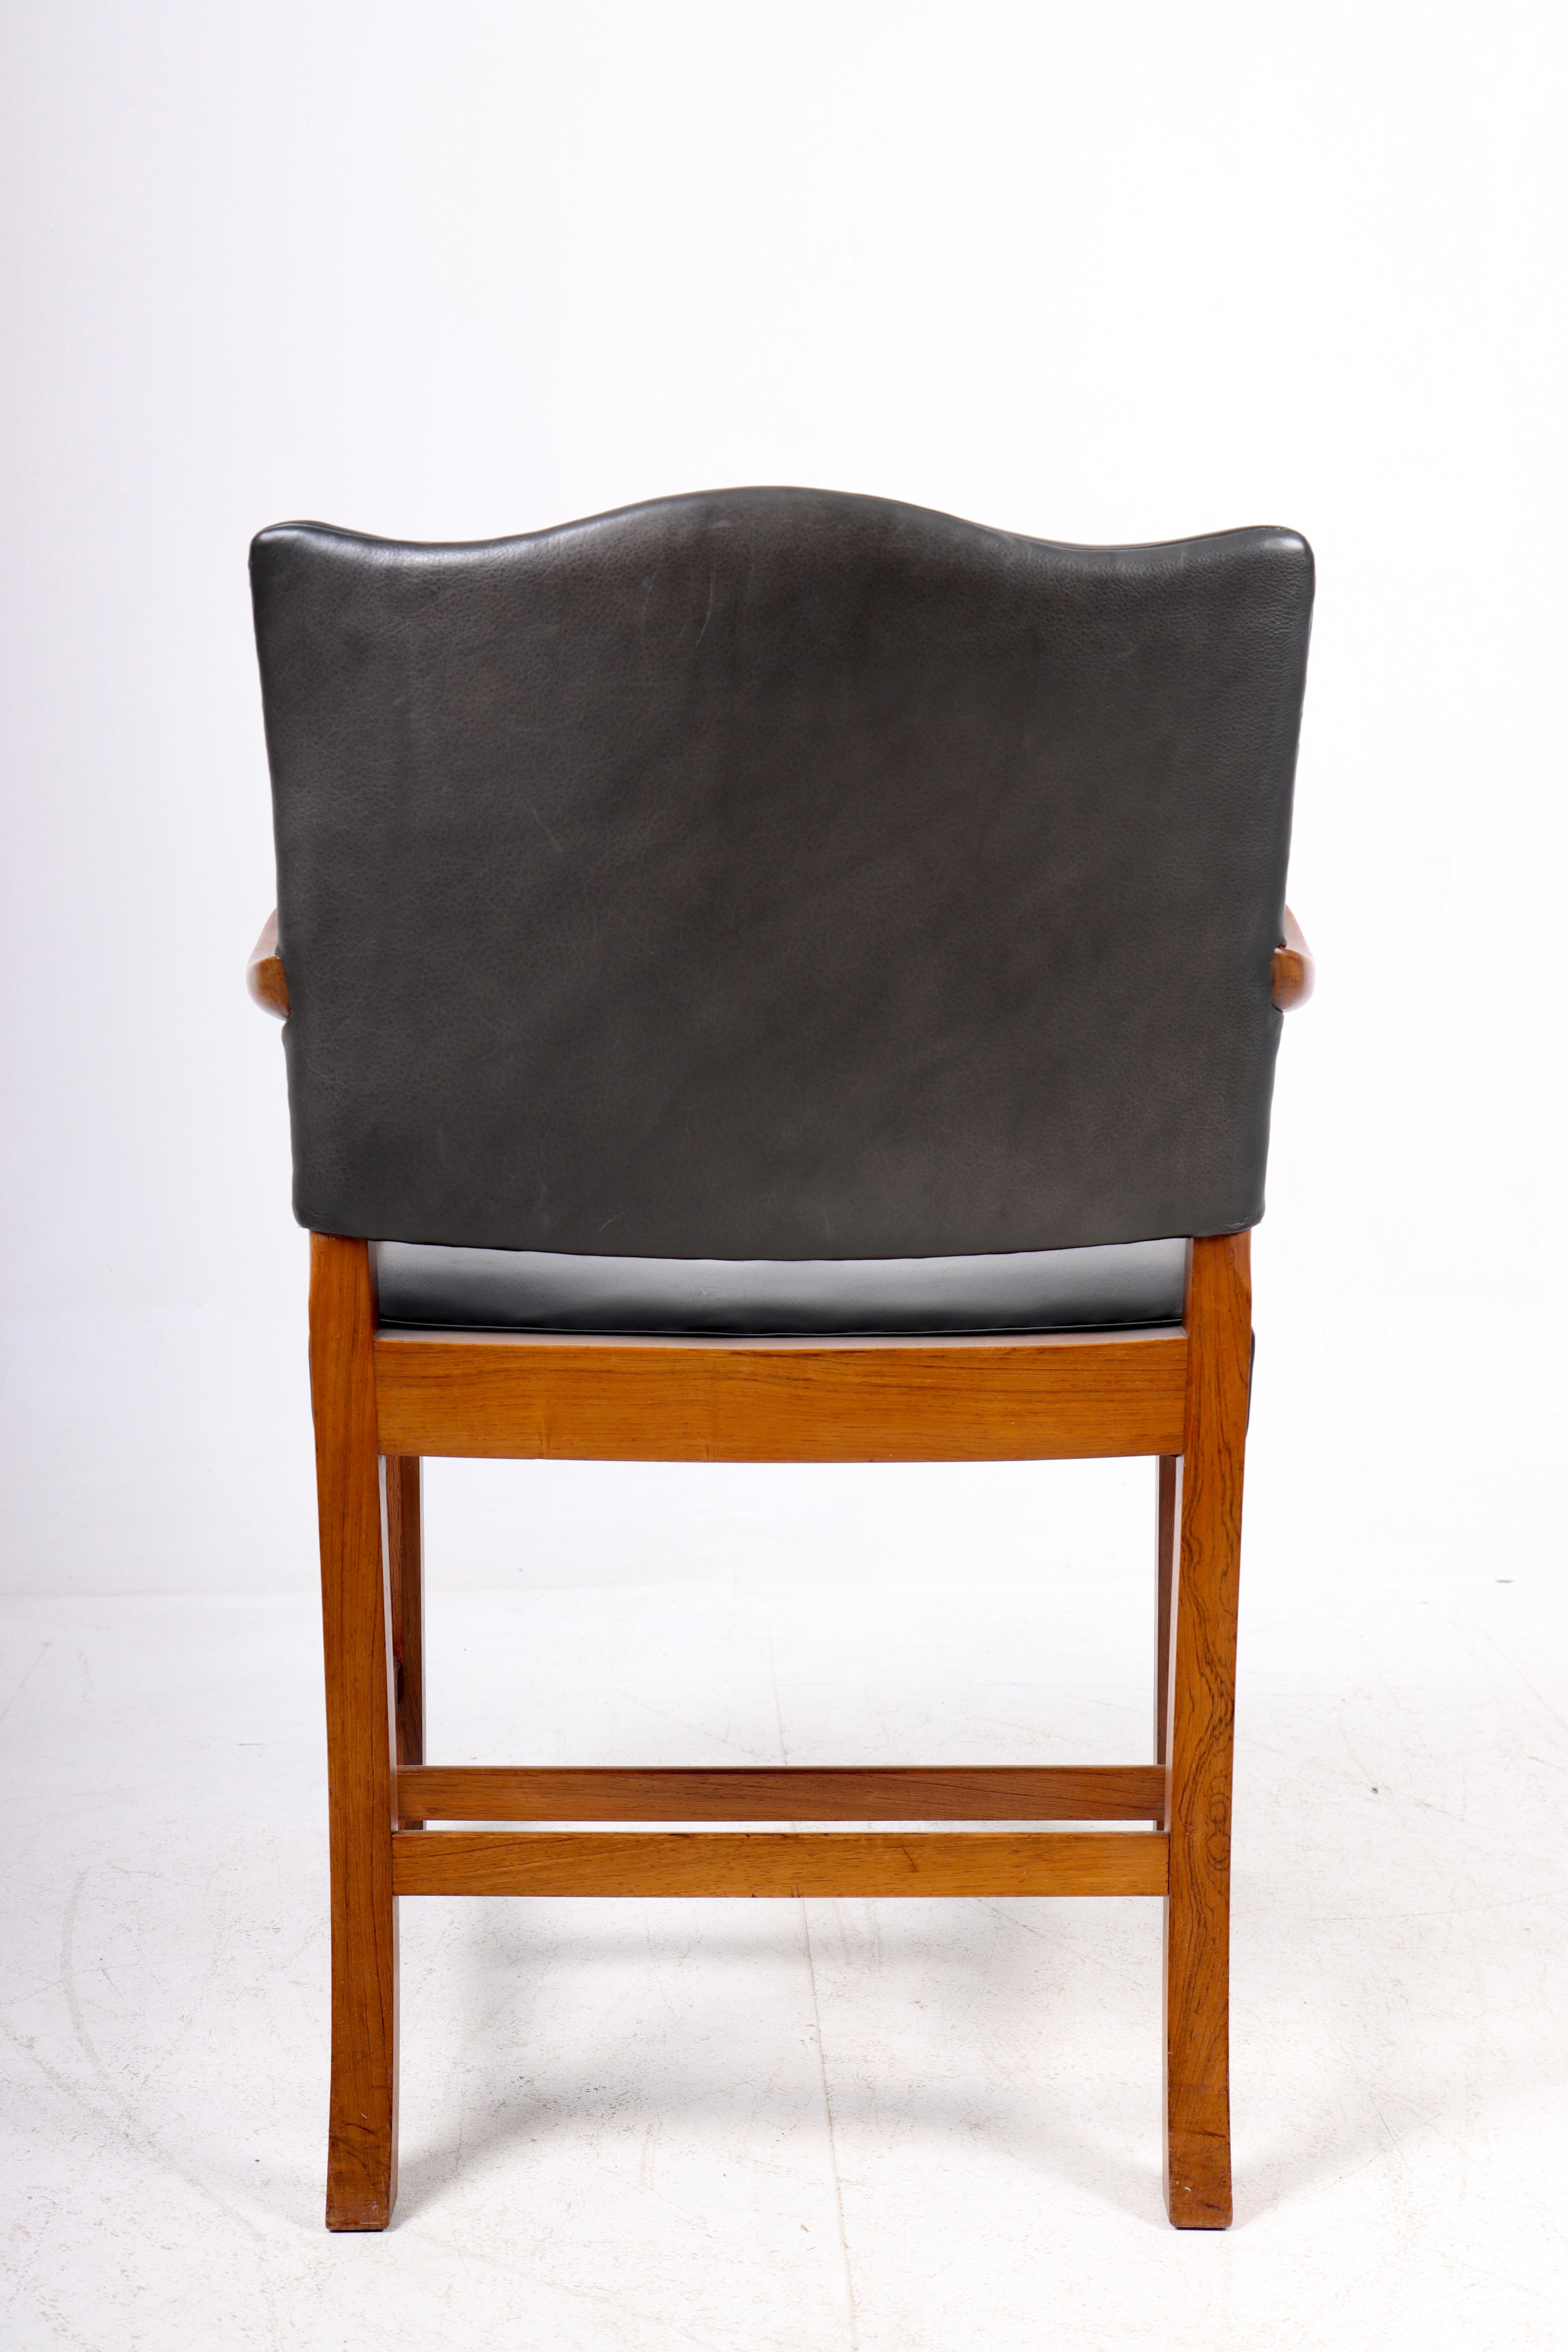 Leather Mid-Century Armchair in Rosewood Designed by Ole Wanscher, Danish Design, 1950s For Sale